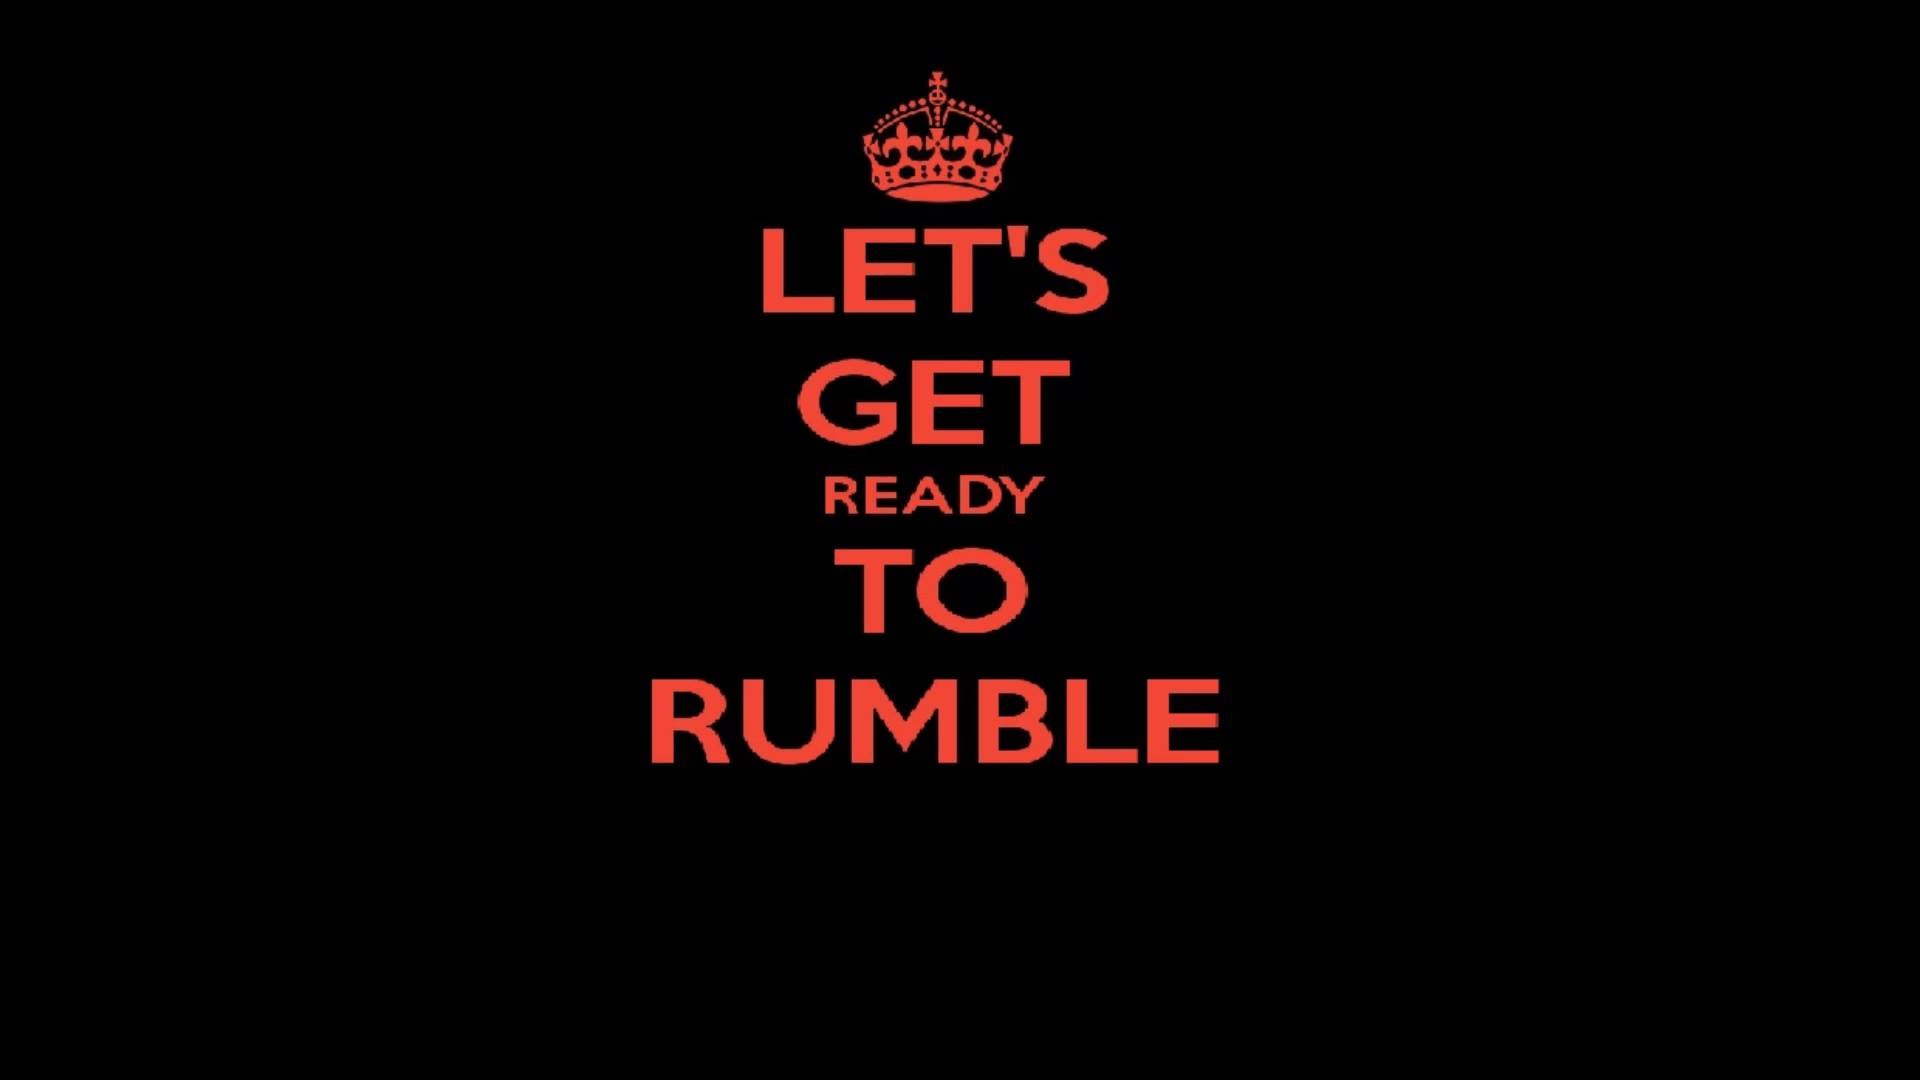 Let get backing. Get ready. Let's get ready to Rumble. Get ready картинка. Let's get ready to Rumble игра.